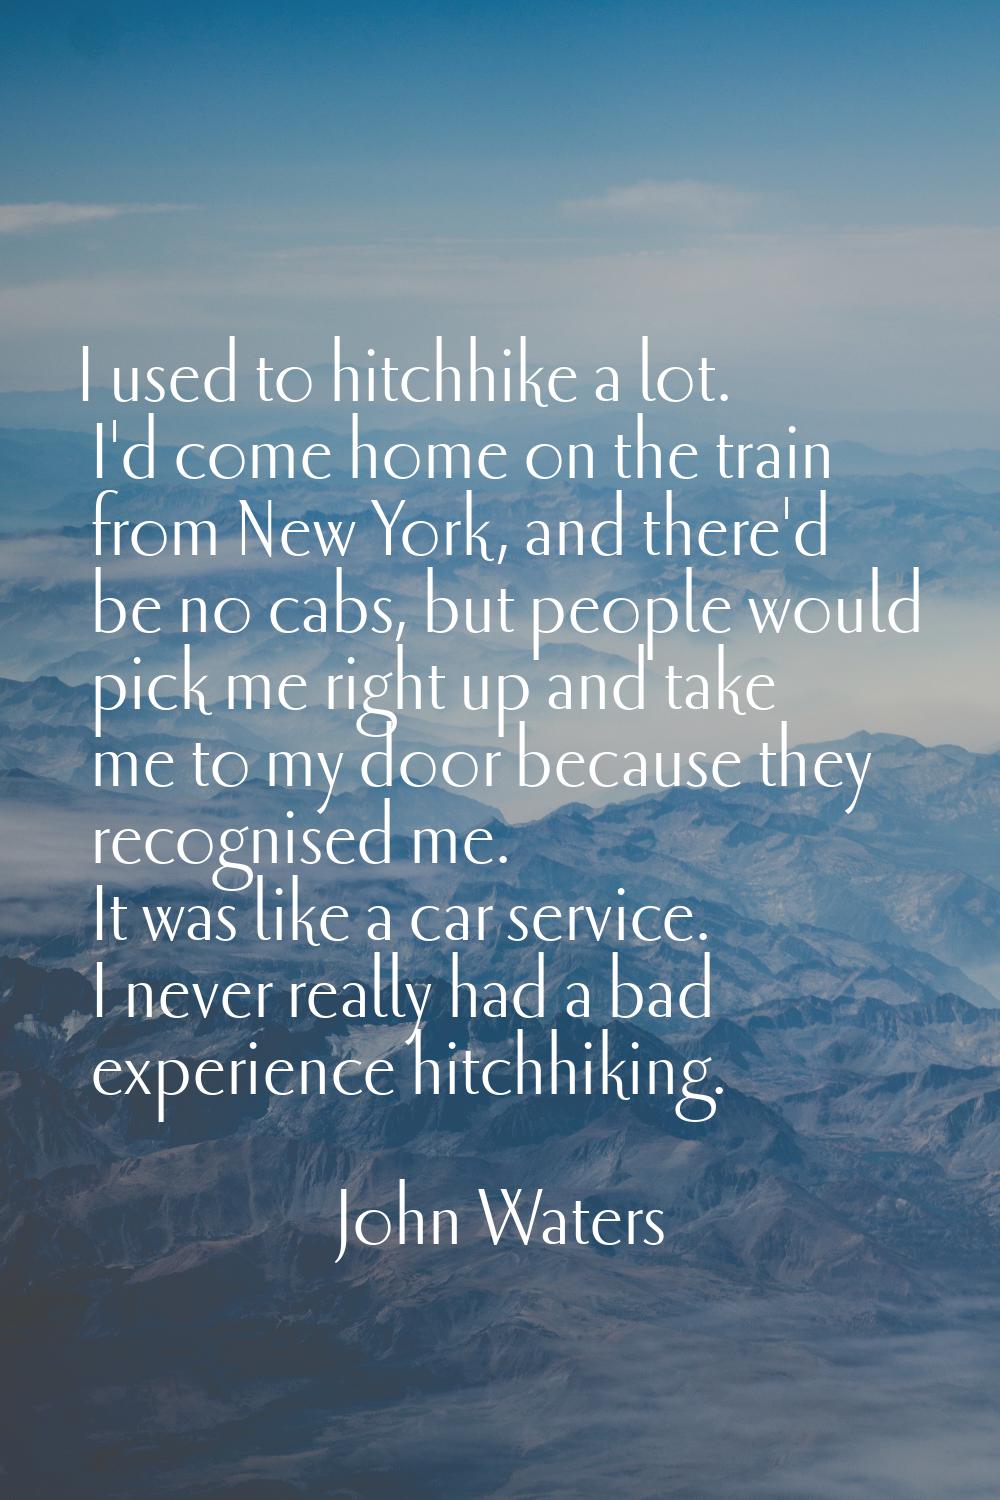 I used to hitchhike a lot. I'd come home on the train from New York, and there'd be no cabs, but pe